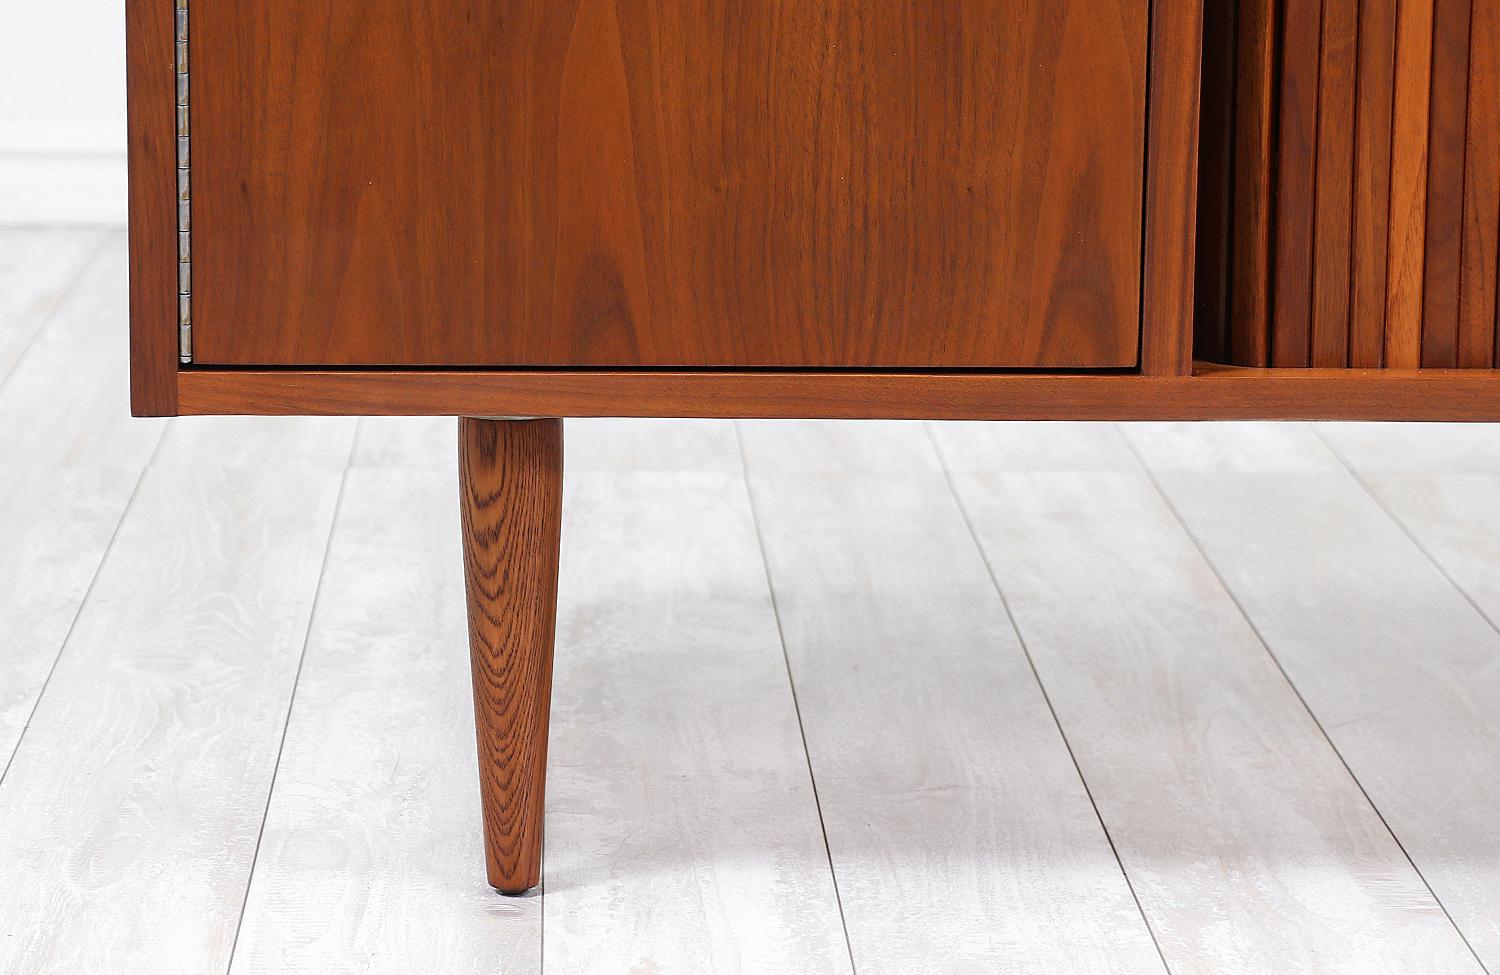 Wood Milo Baughman Tambour-Door Credenza with Lacquered Drawers for Glenn of Cal.